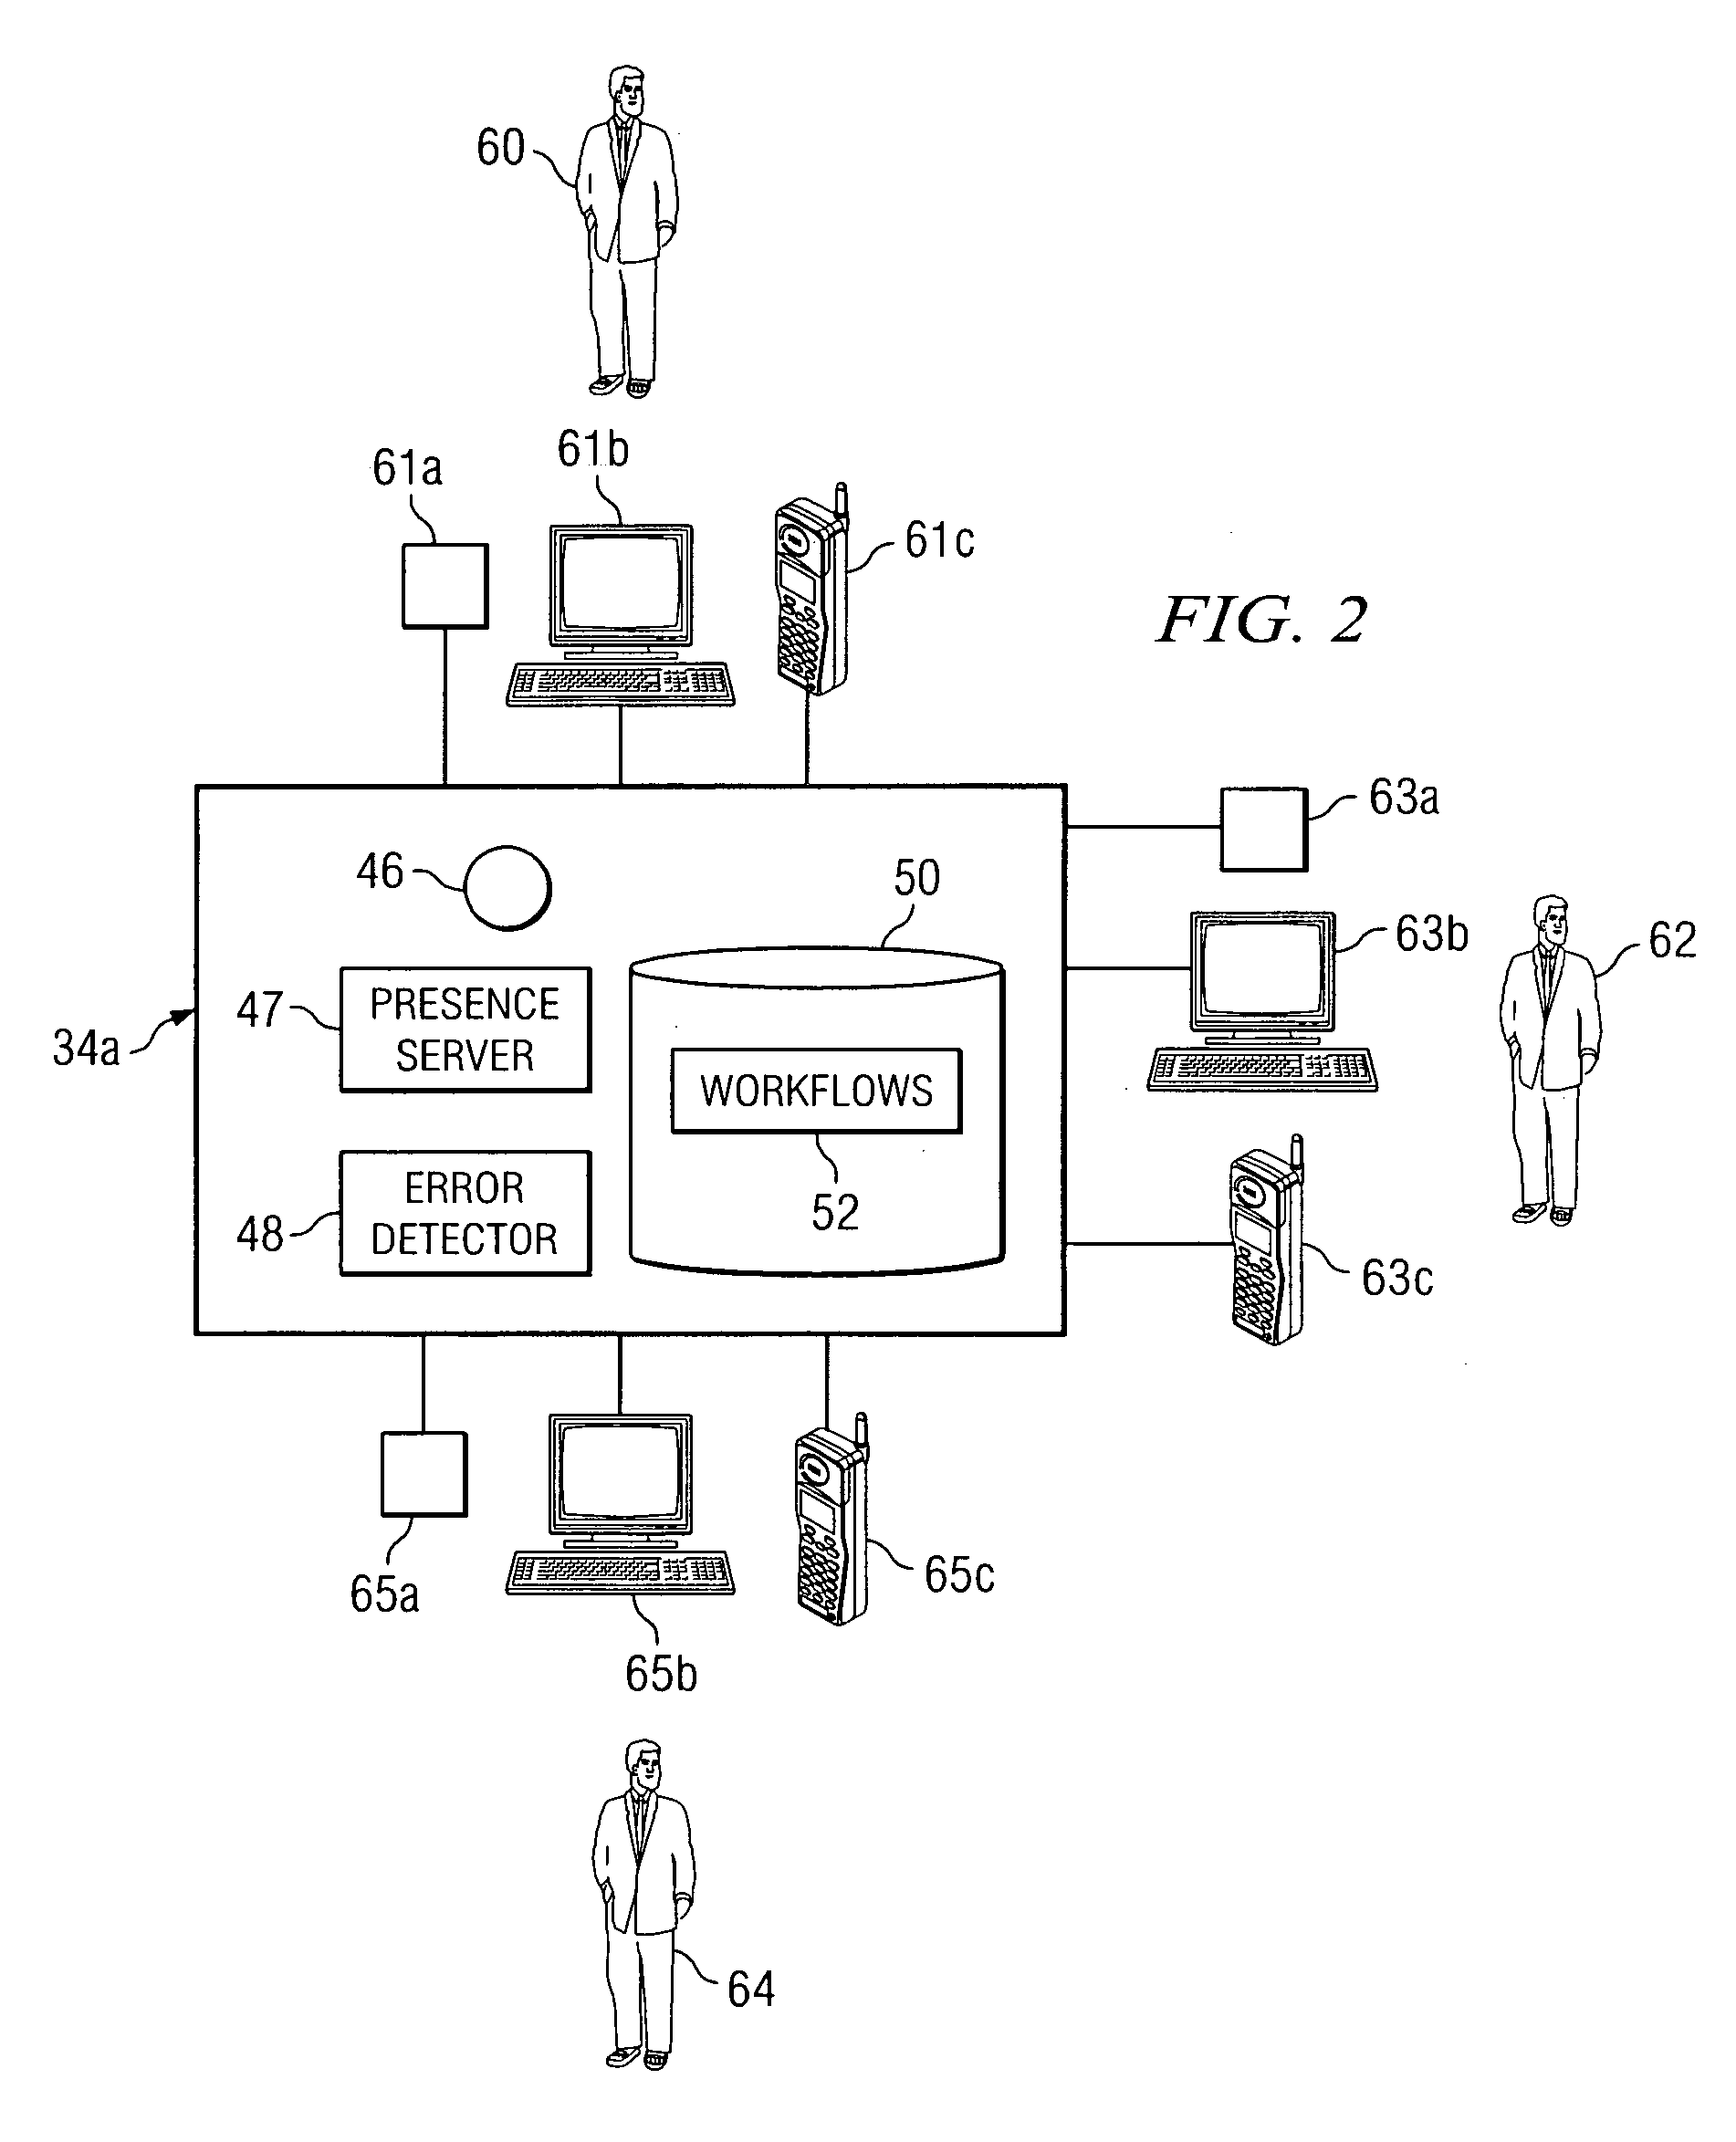 Method and system for using presence information in error notification